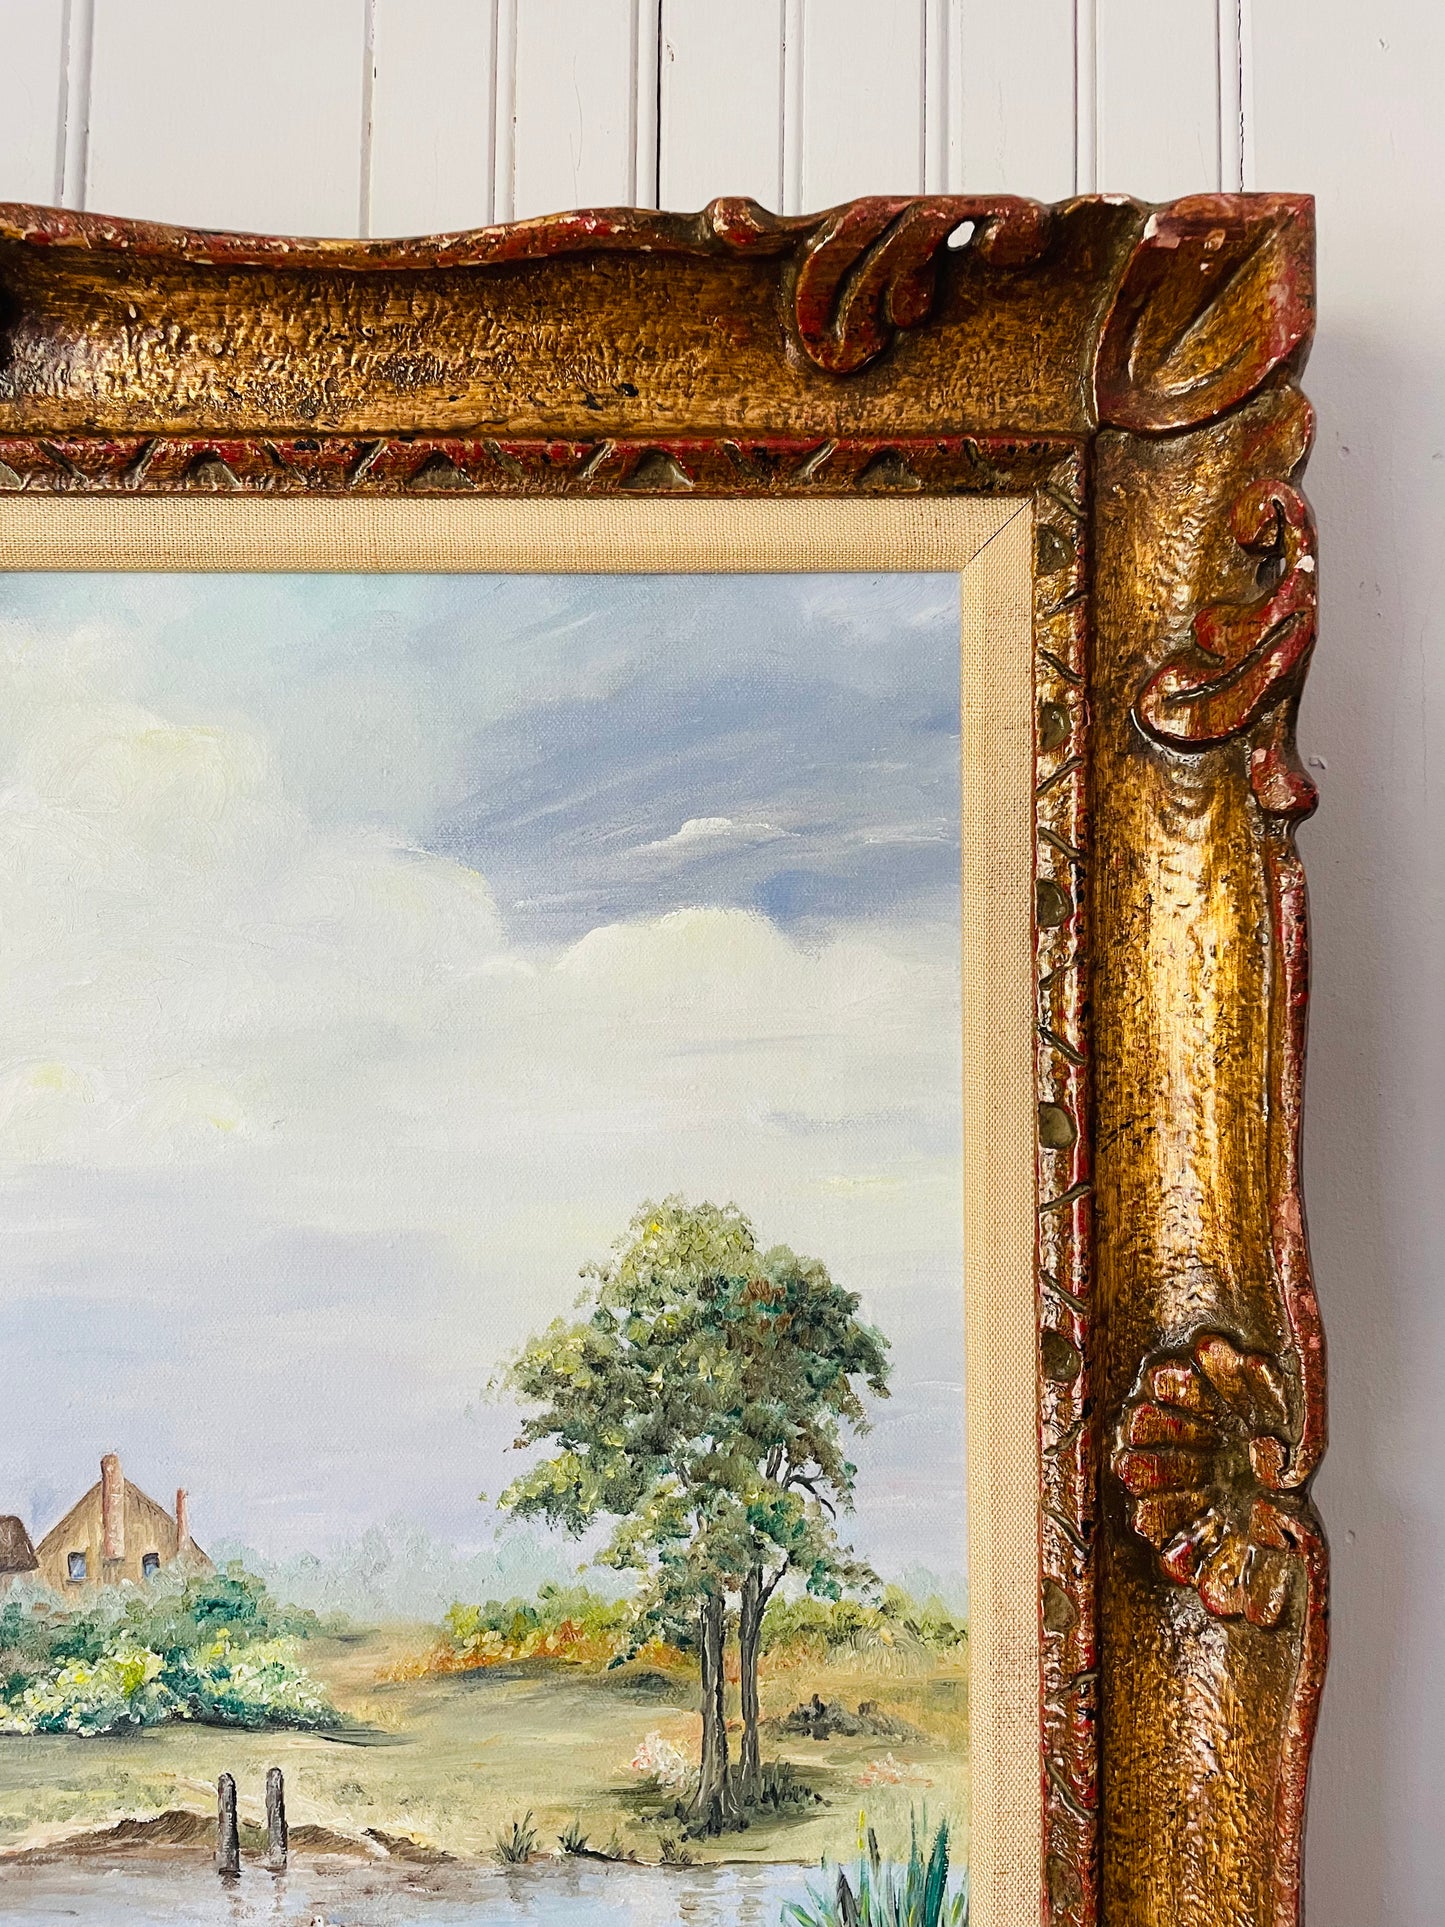 Original Art - Oil Painting of Cottage Scene in Ornate Frame - Signed by Artist D. Bowlby Circa 1930